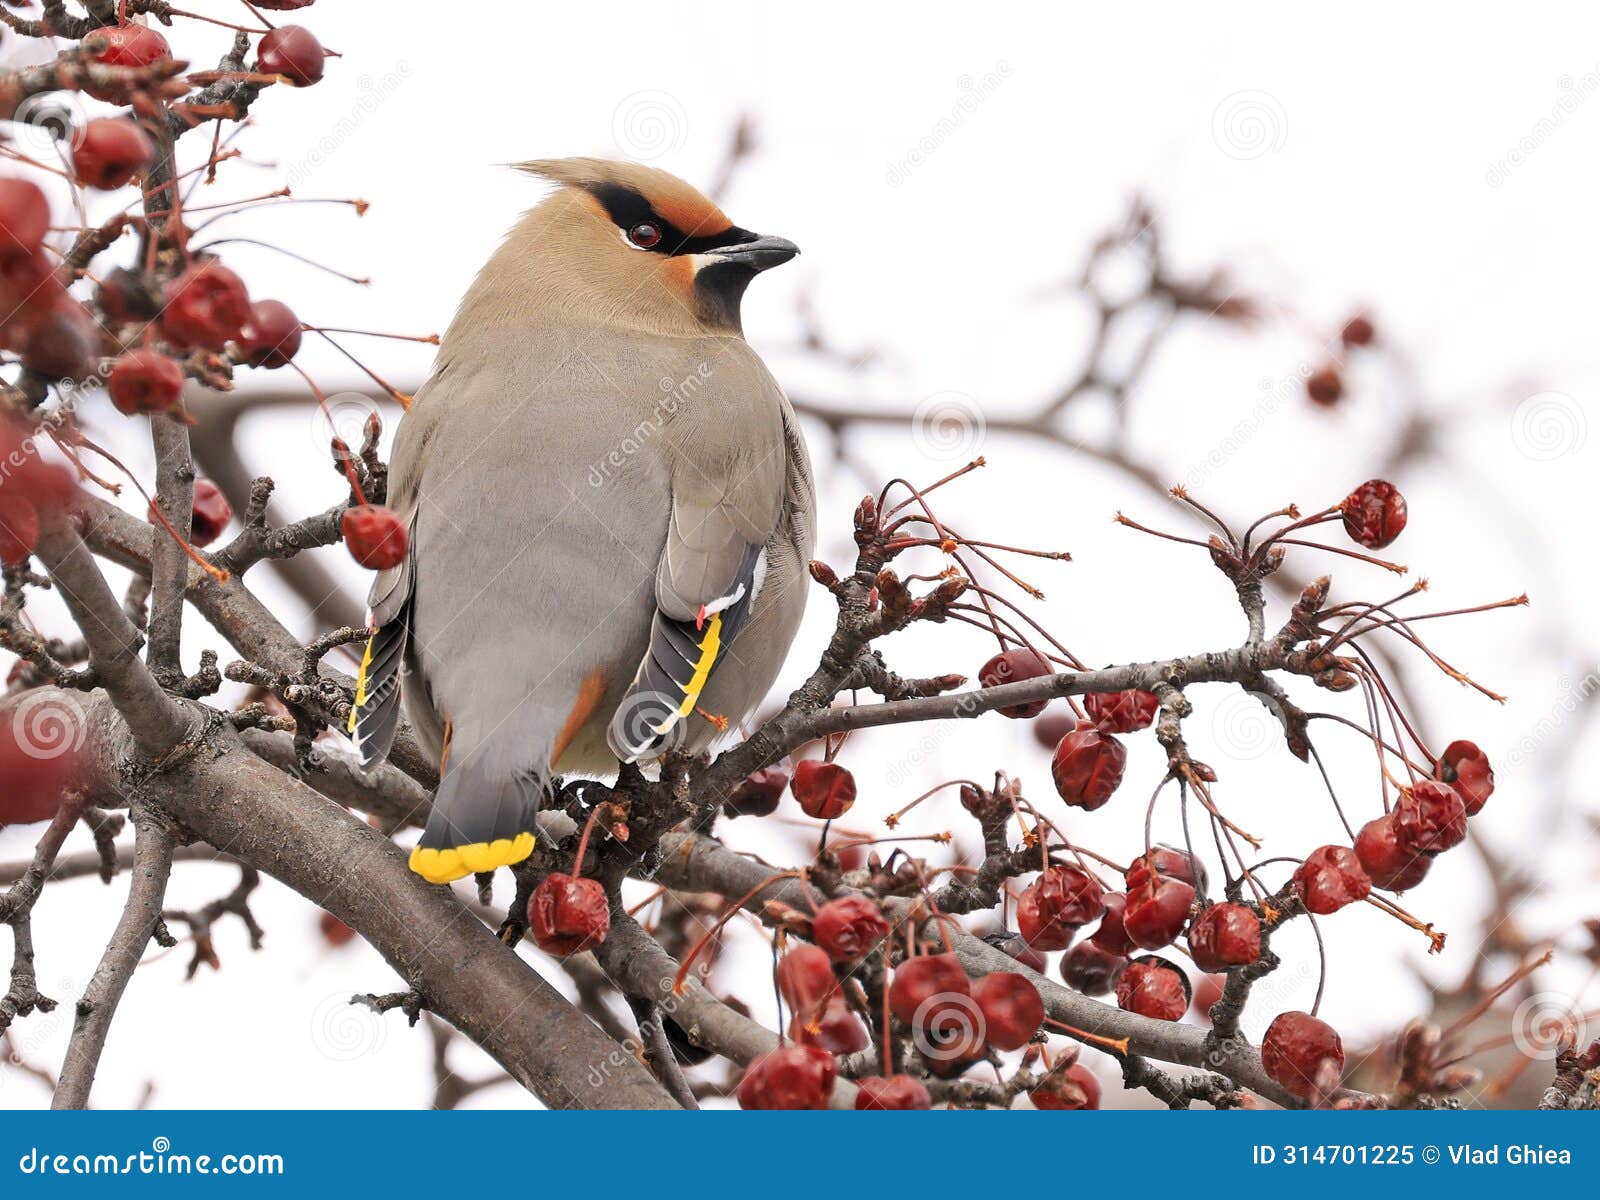 bohemian waxwing perched on a tree branch